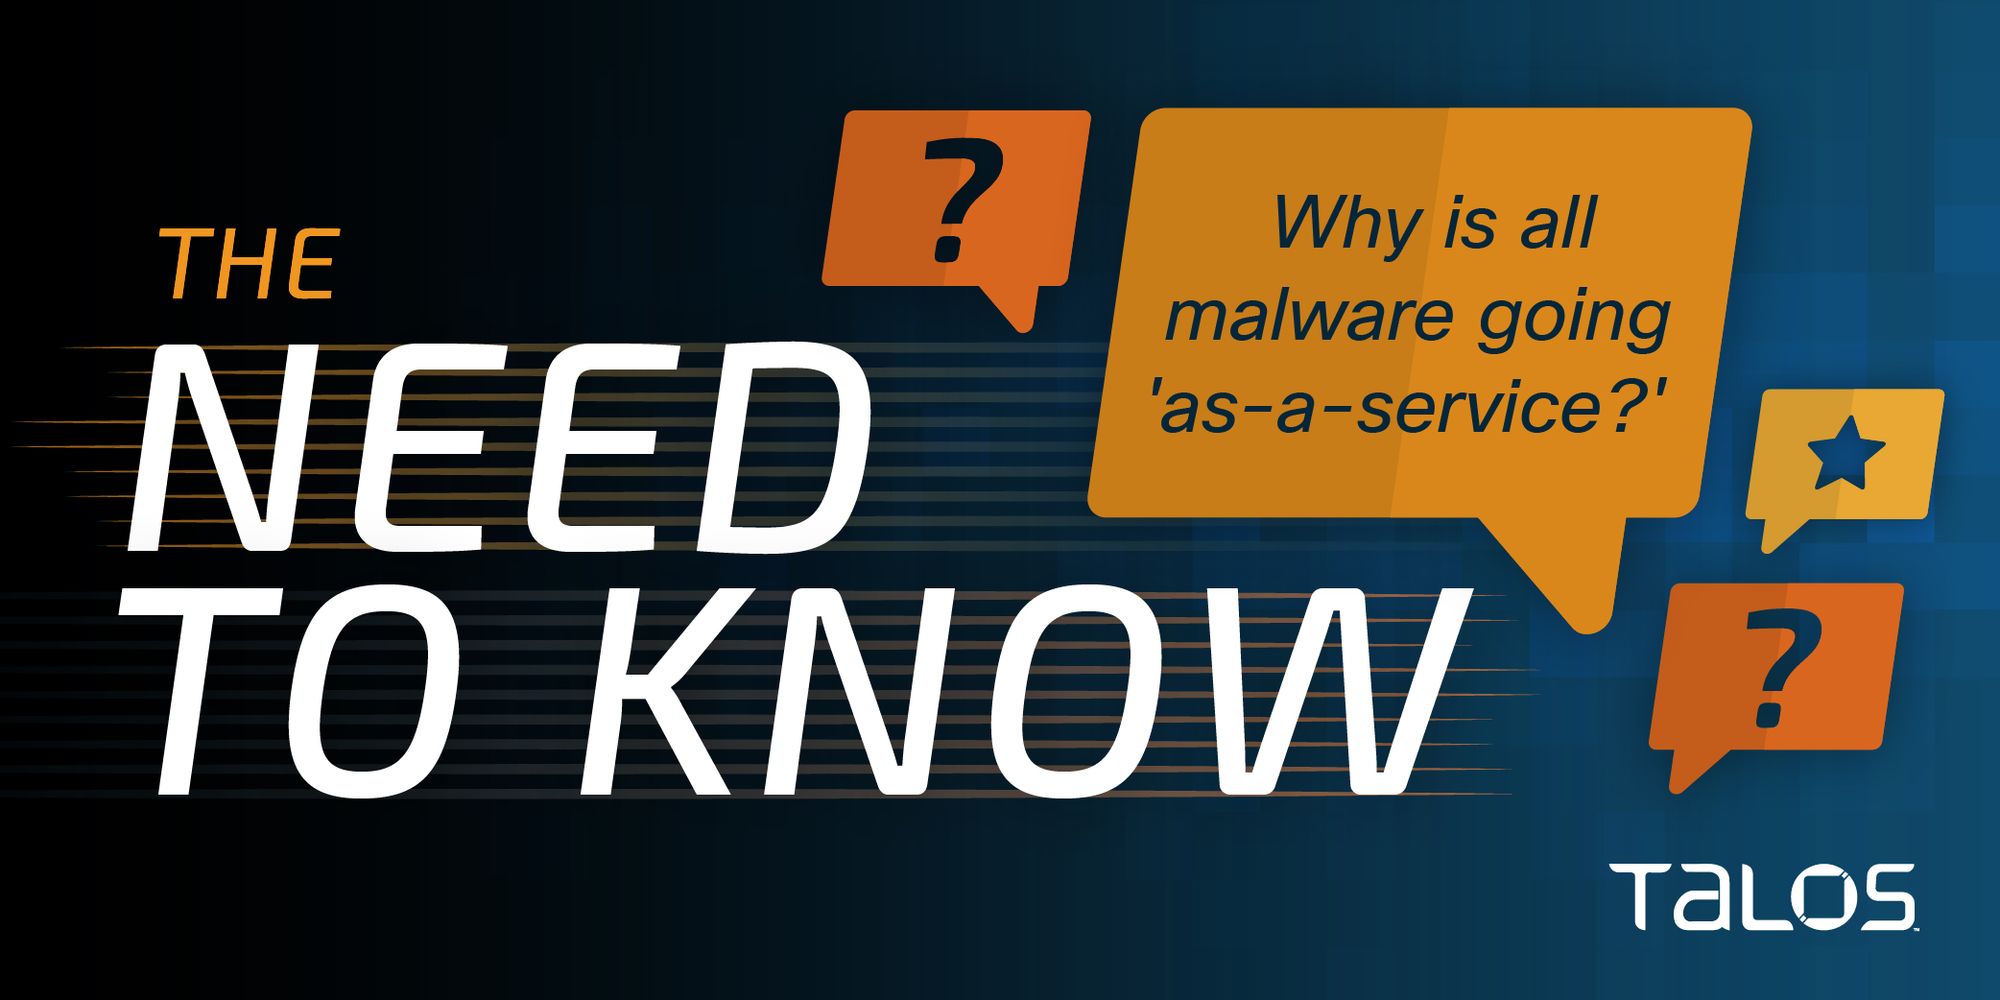 Why are there so many malware-as-a-service offerings?